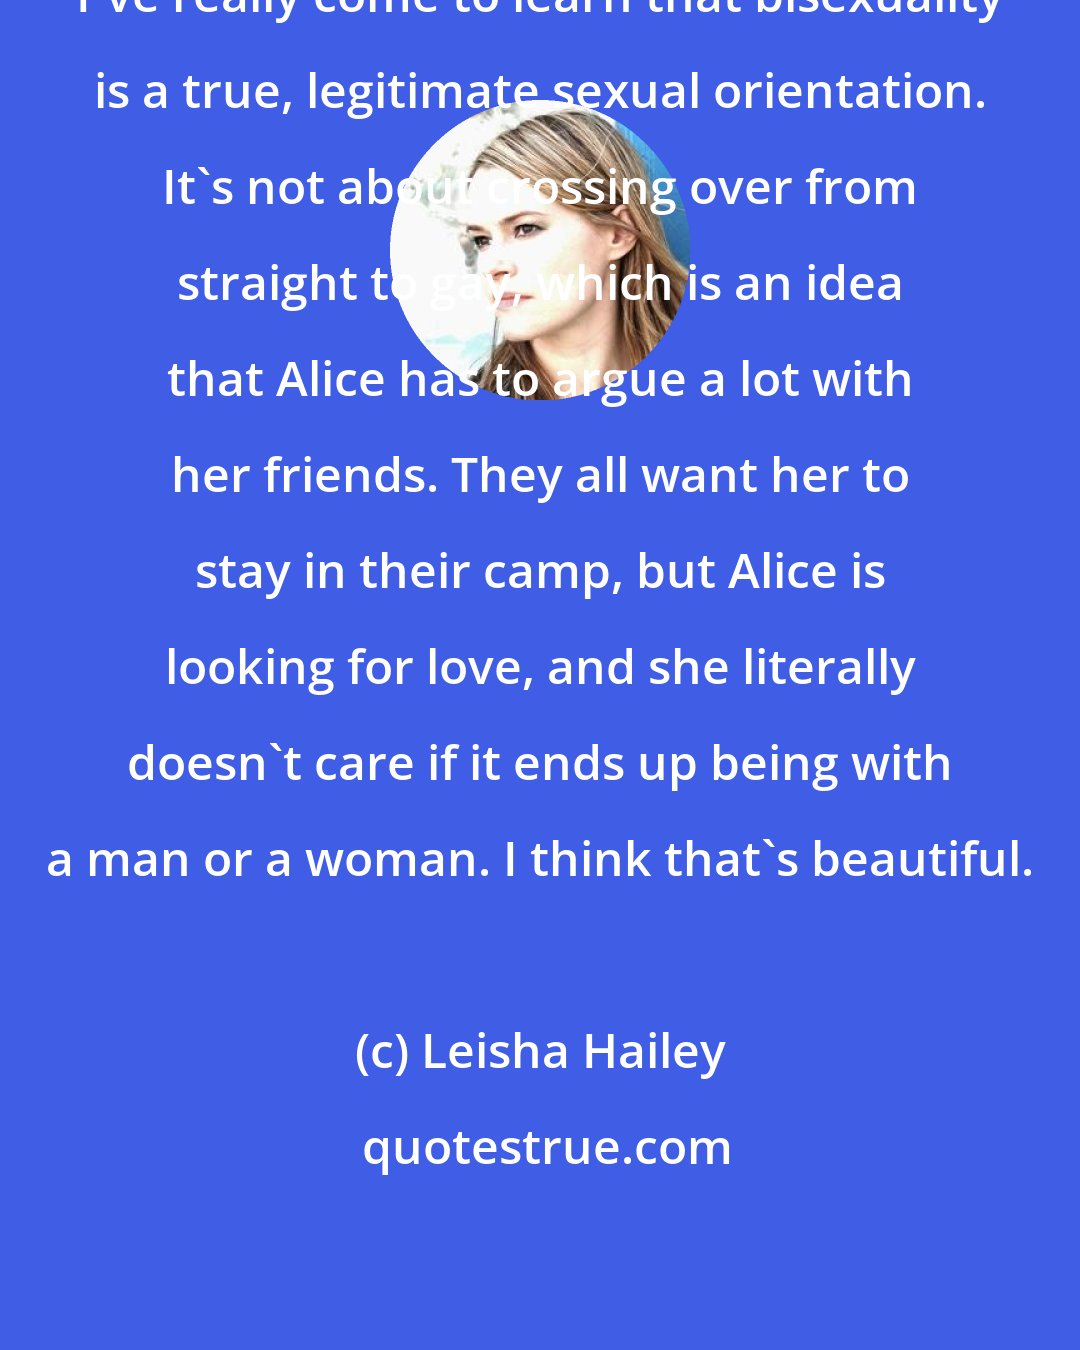 Leisha Hailey: I've really come to learn that bisexuality is a true, legitimate sexual orientation. It's not about crossing over from straight to gay, which is an idea that Alice has to argue a lot with her friends. They all want her to stay in their camp, but Alice is looking for love, and she literally doesn't care if it ends up being with a man or a woman. I think that's beautiful.